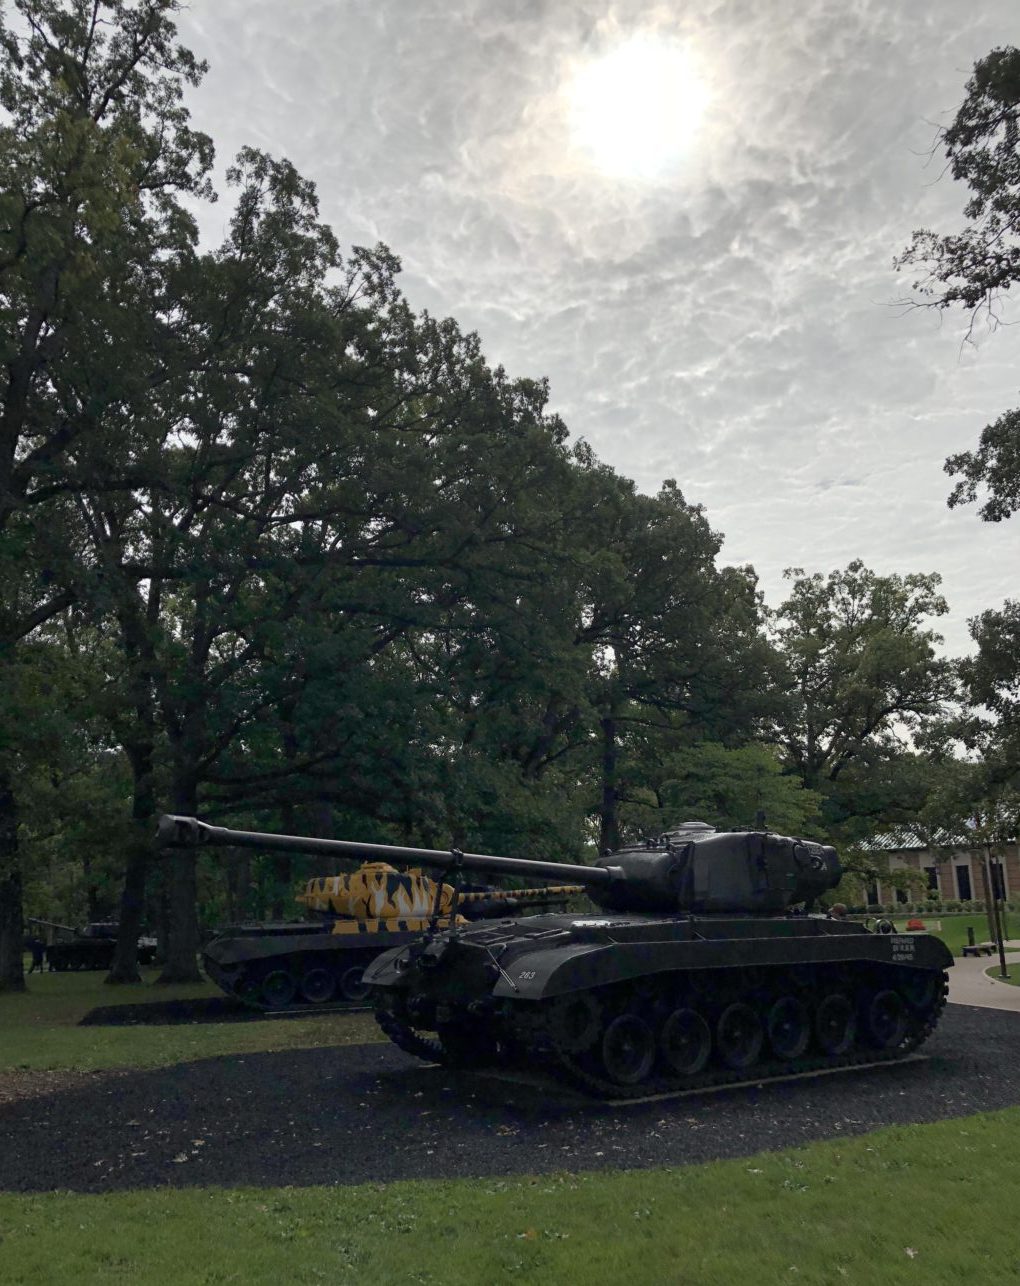 Fun Family Field Trip: Cantigny Park | Tips to explore the gardens and park with kids in tow